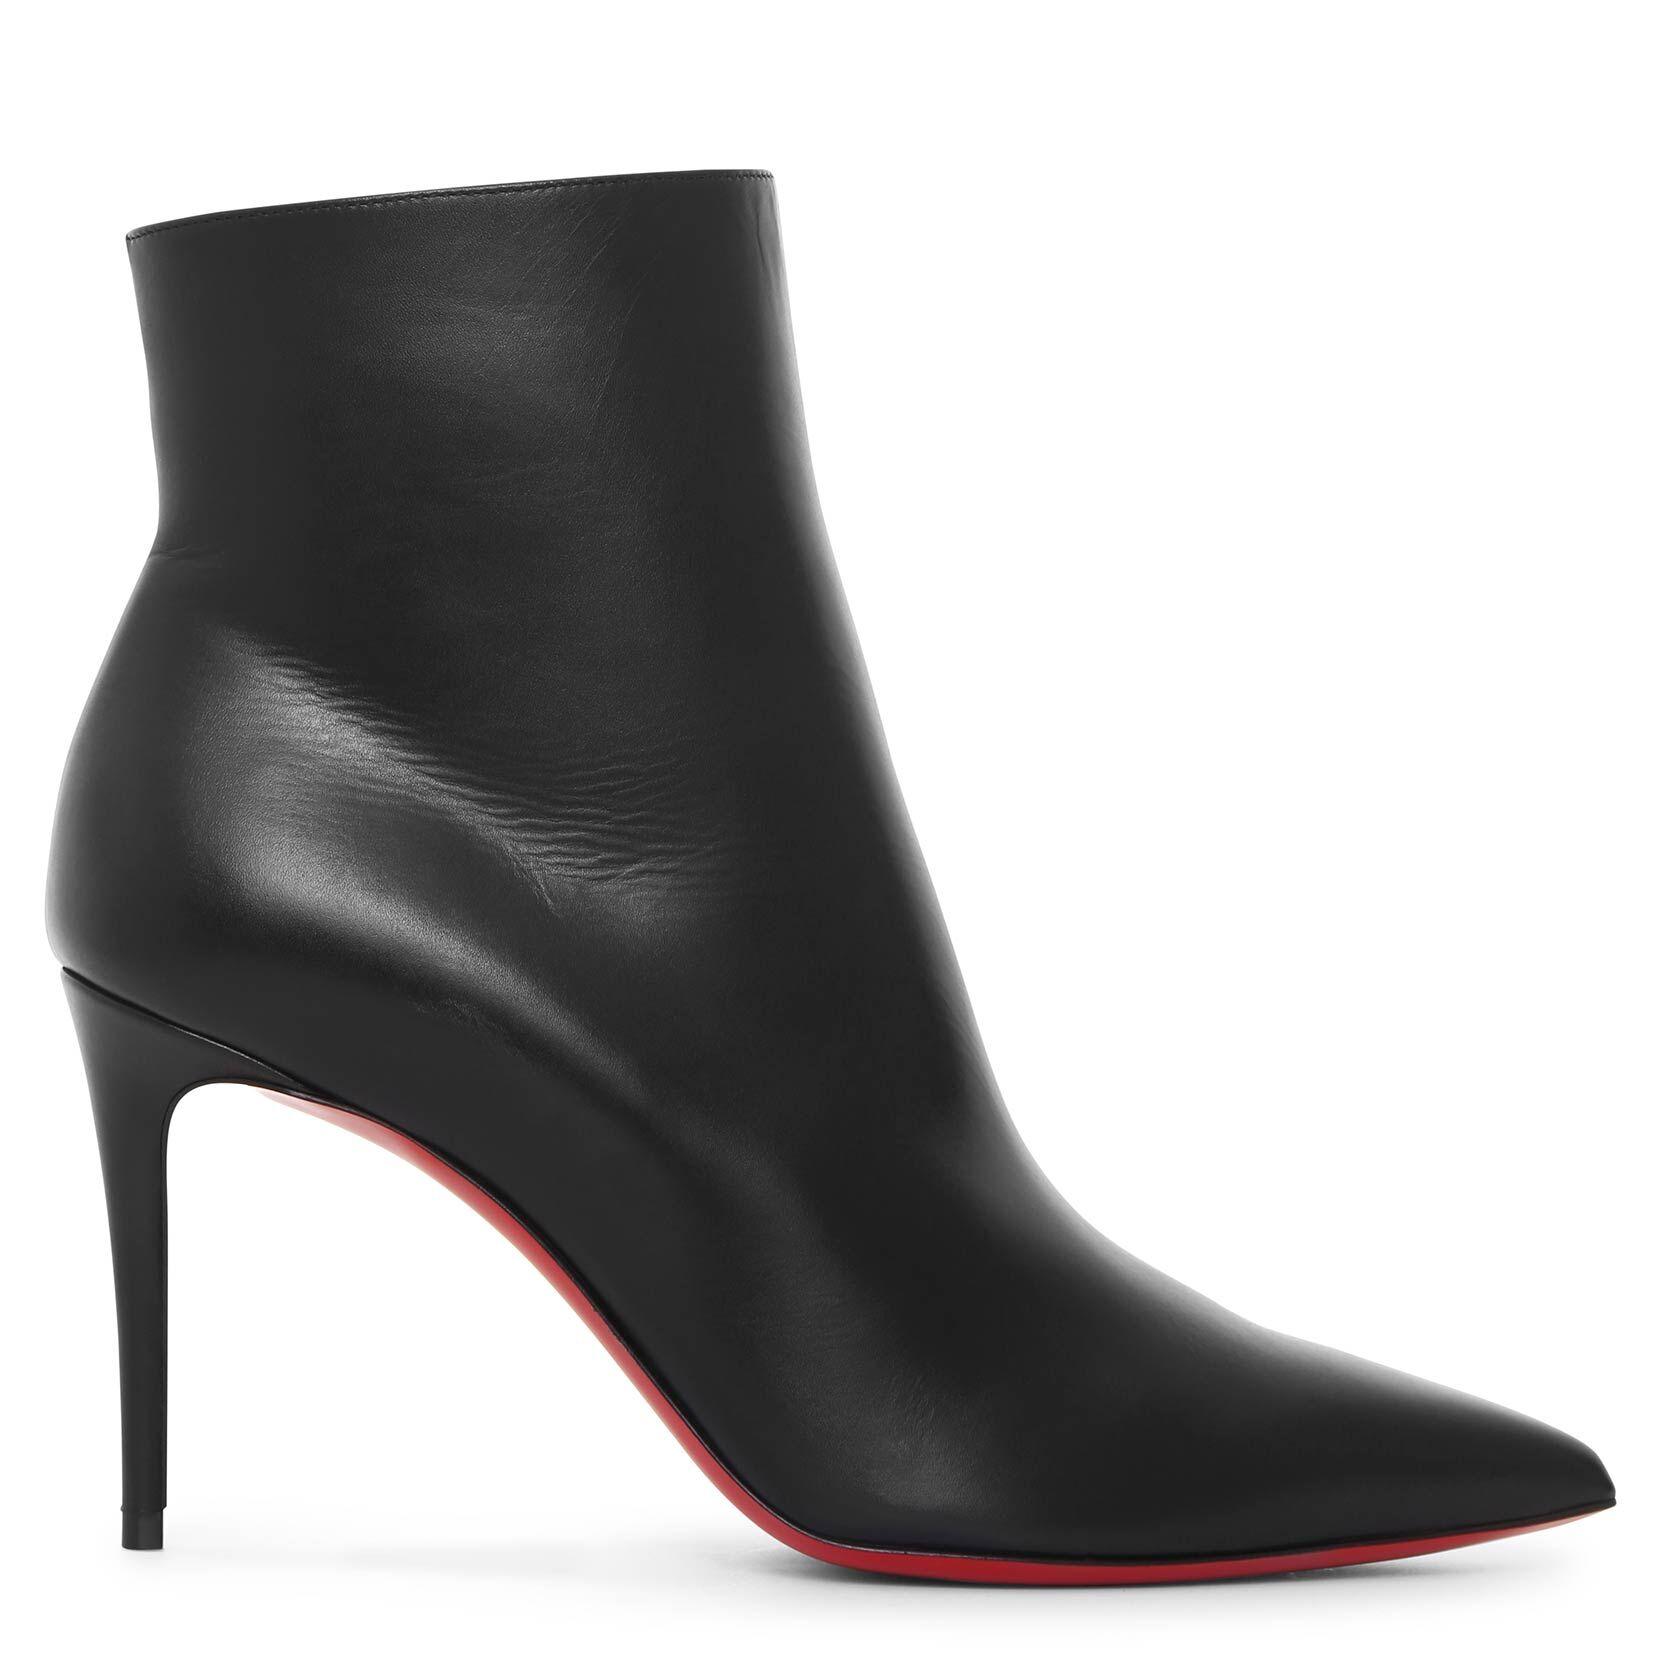 Christian Louboutin Leather So Kate 85 Ankle Boots in Black - Lyst